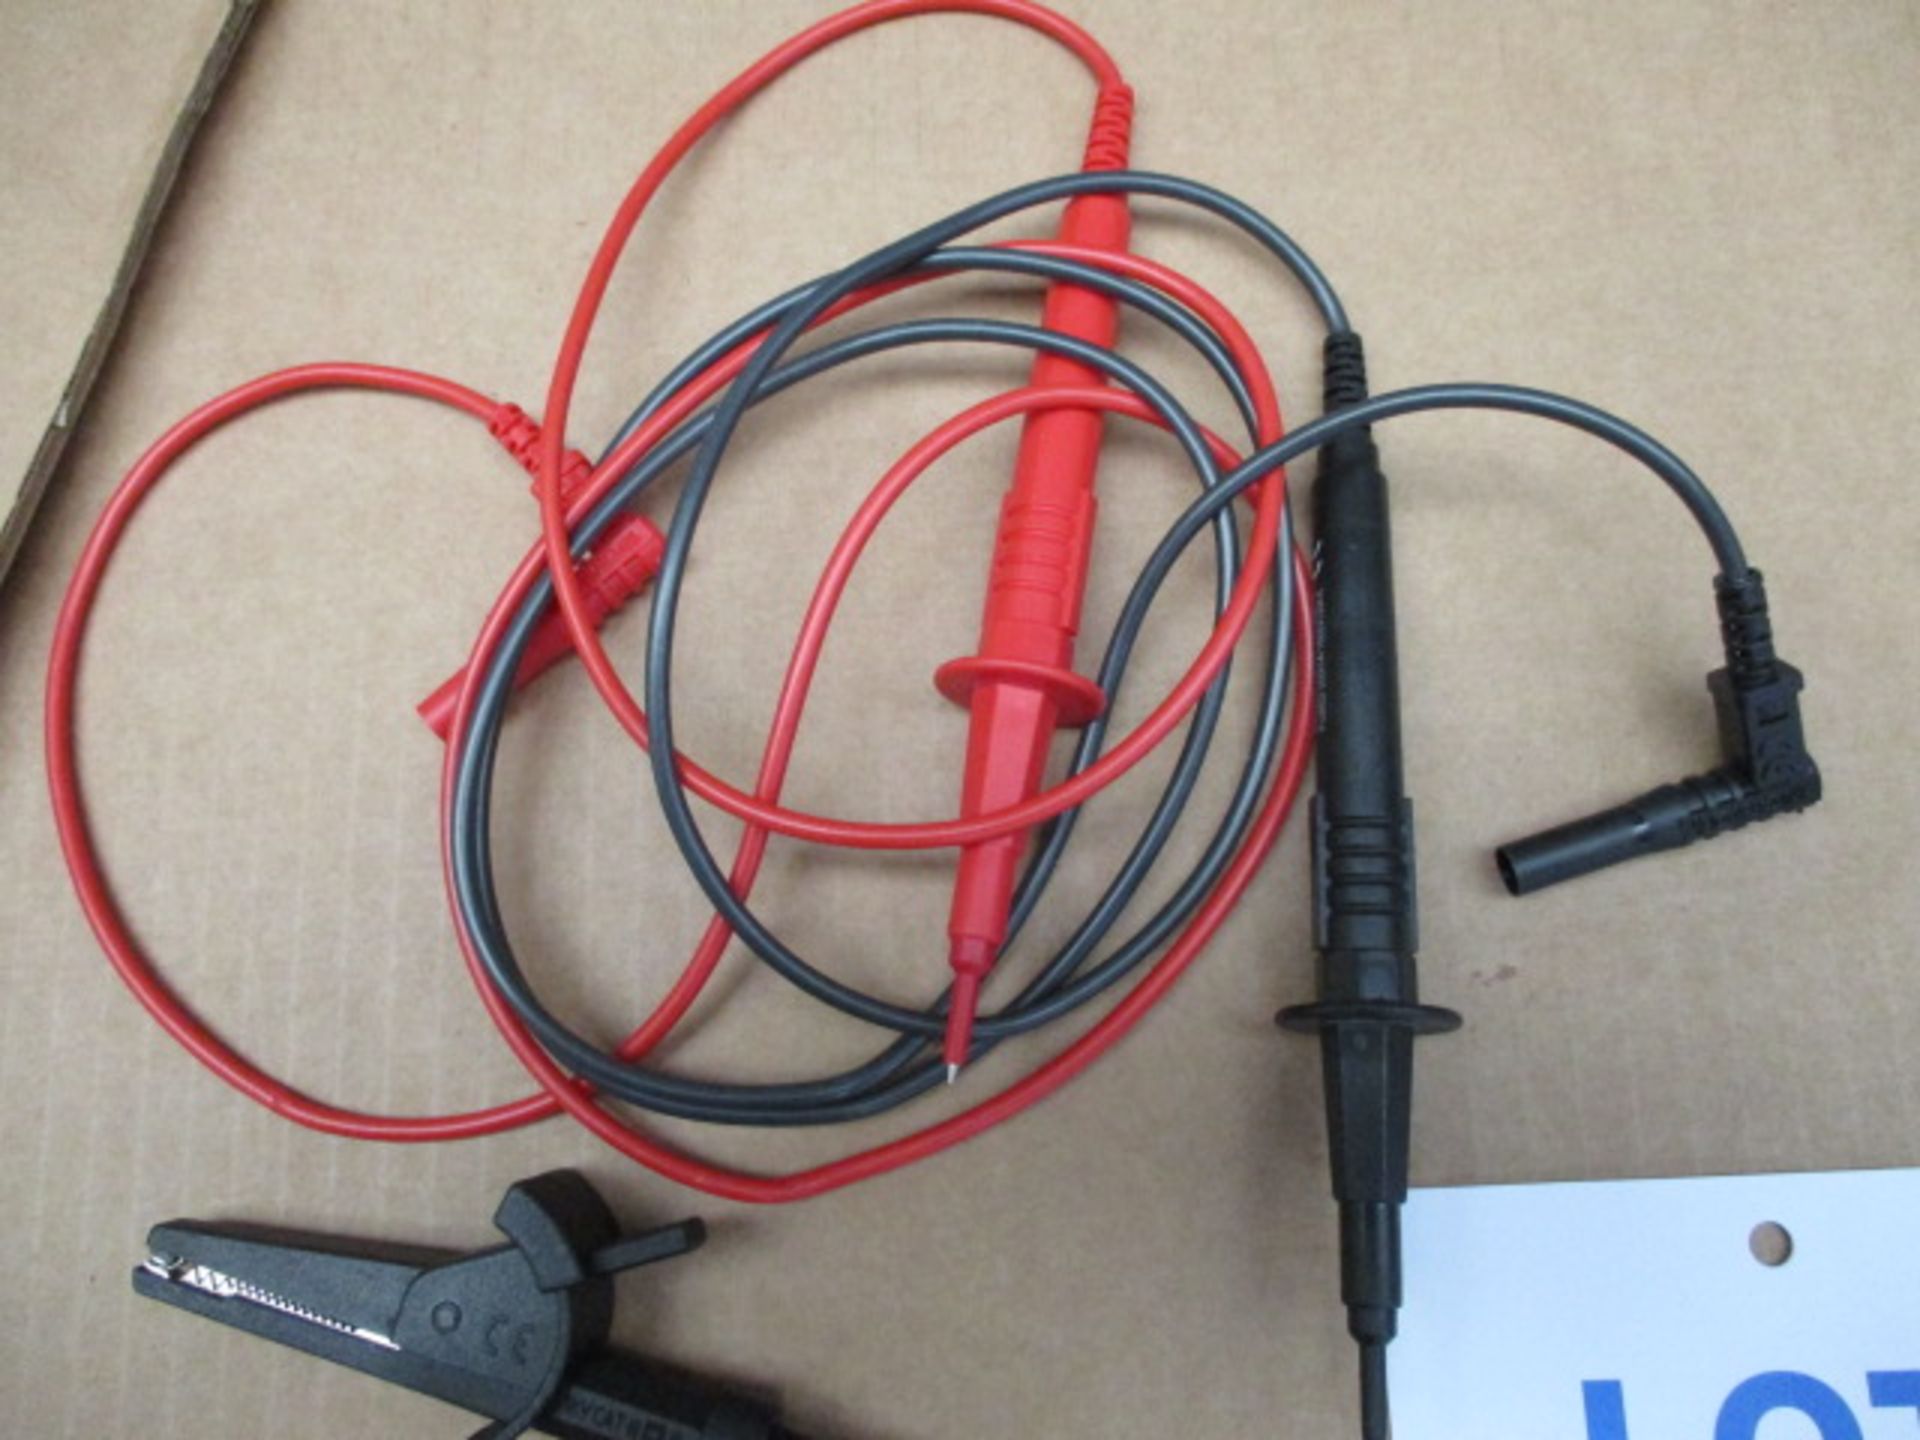 Test leads - Image 4 of 4